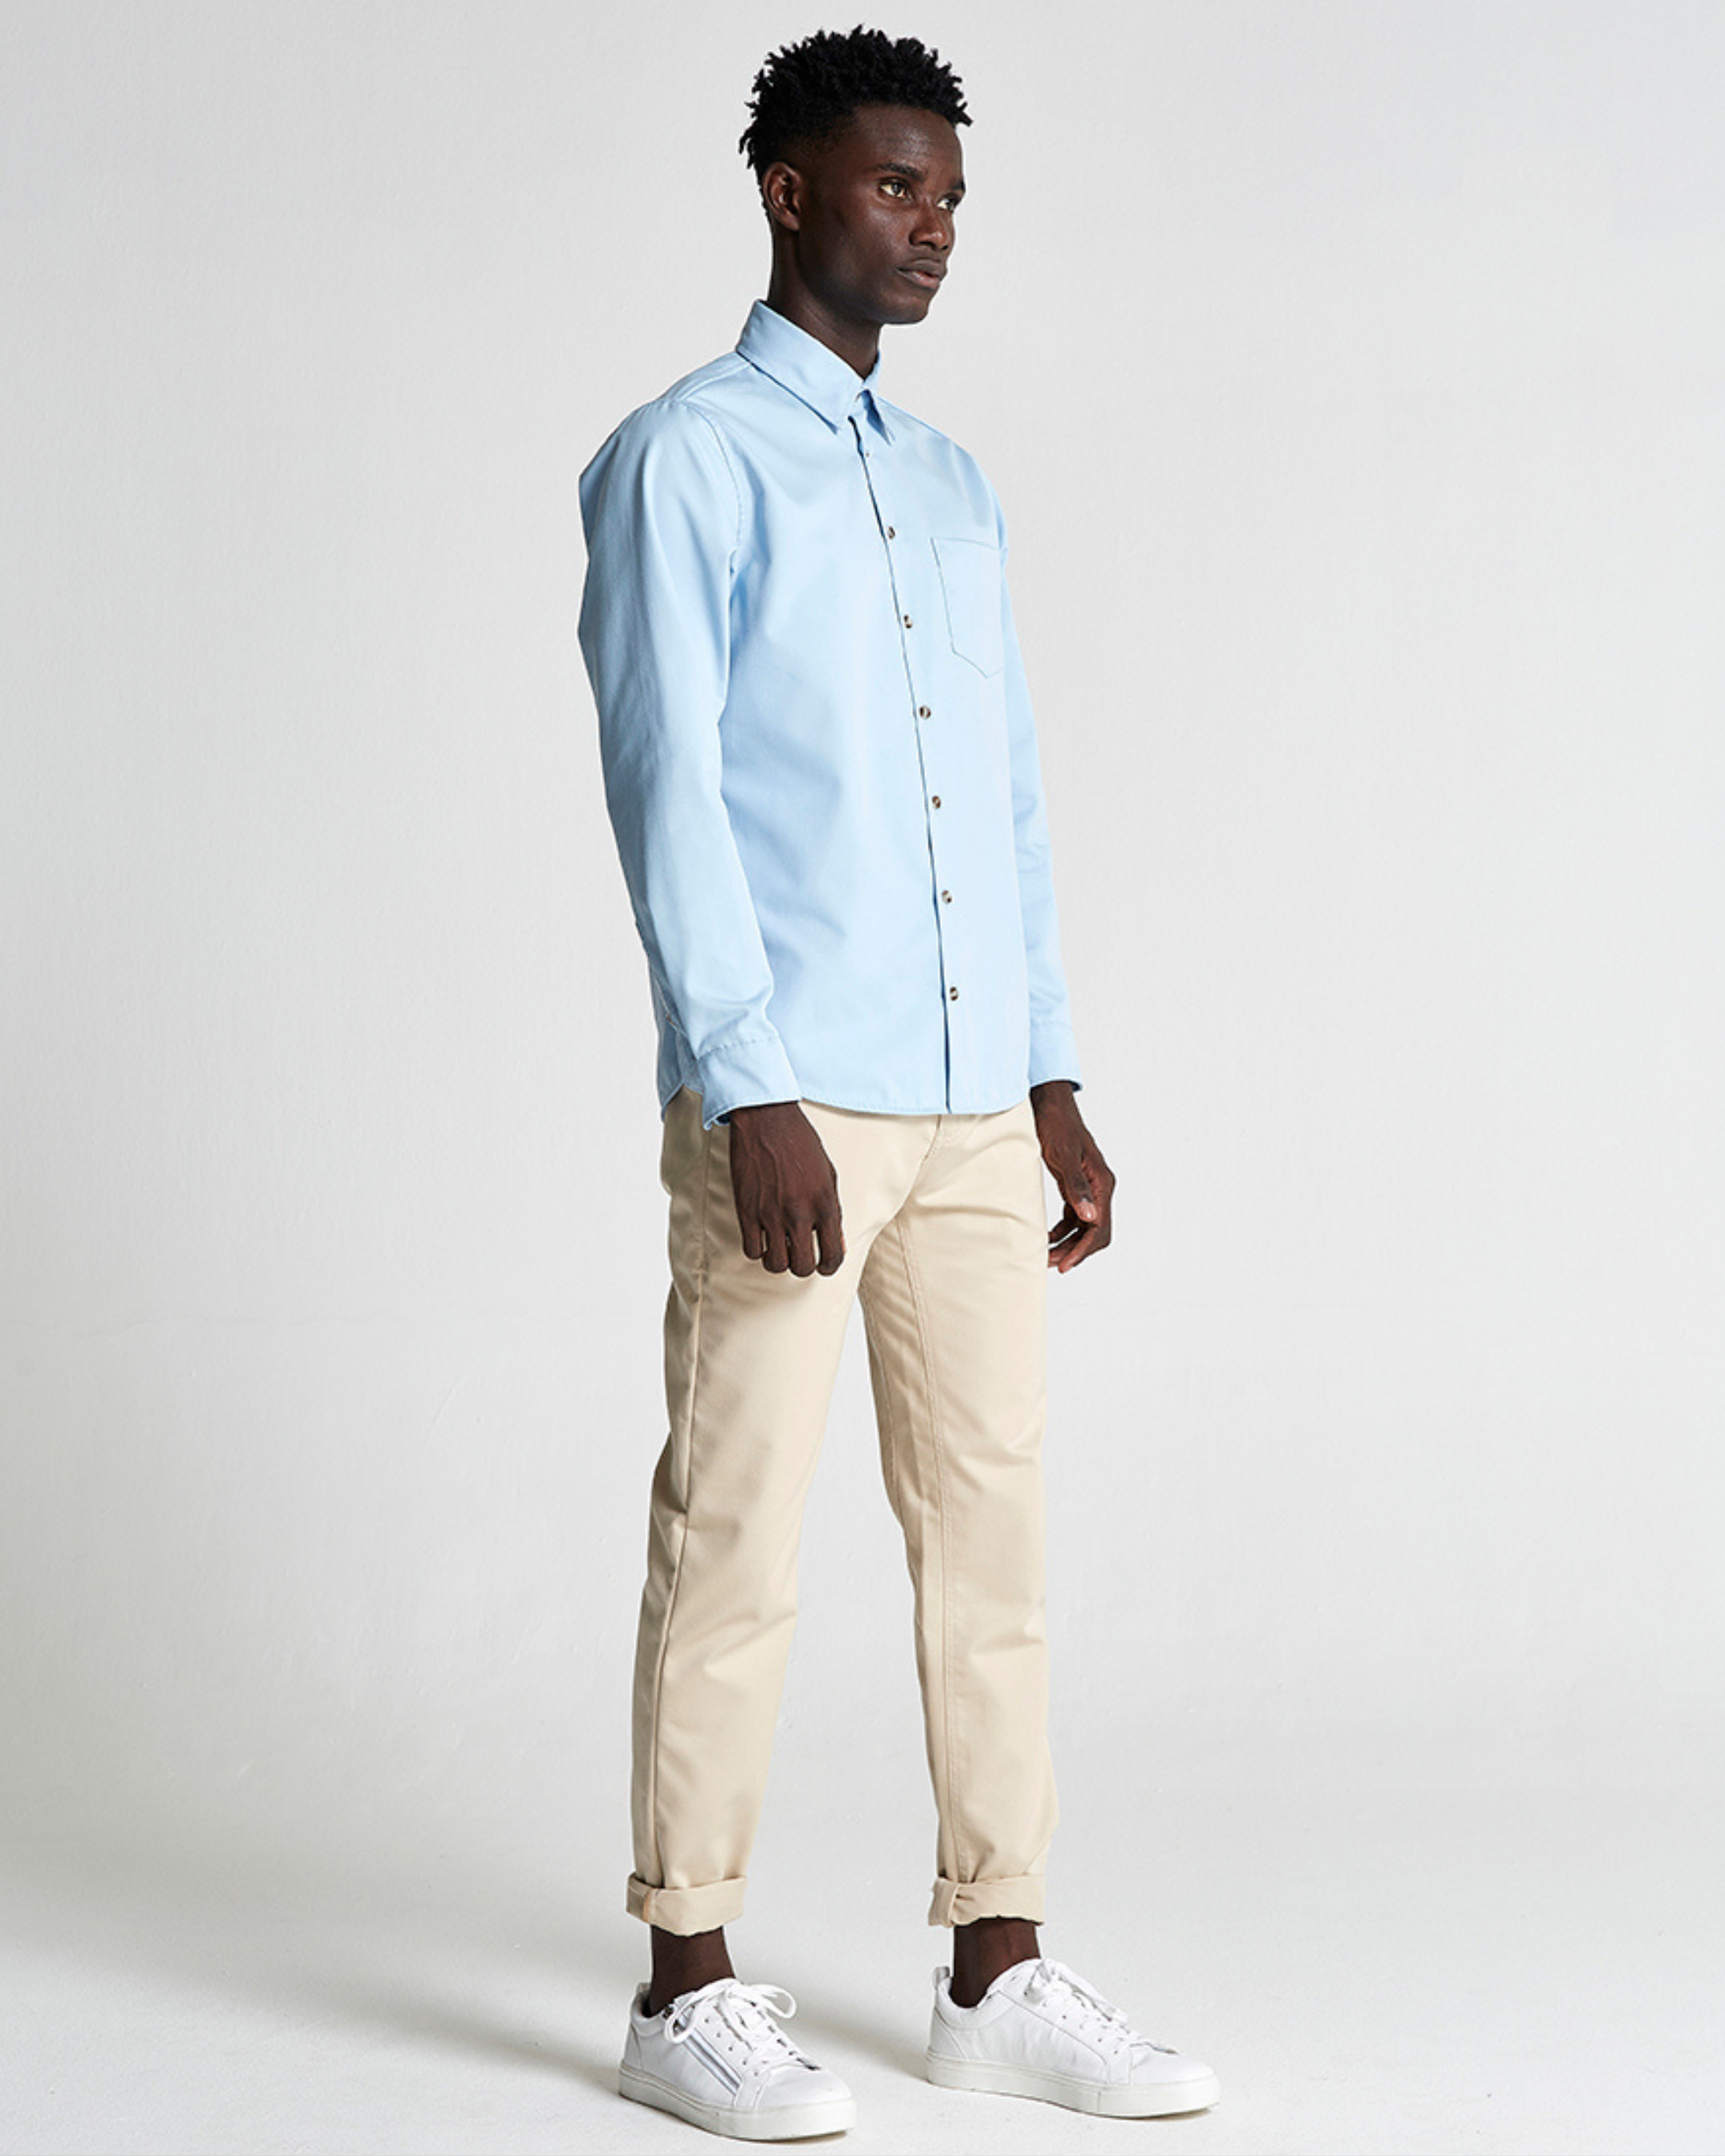 The 1 Pocket Shirt in Blue Bell